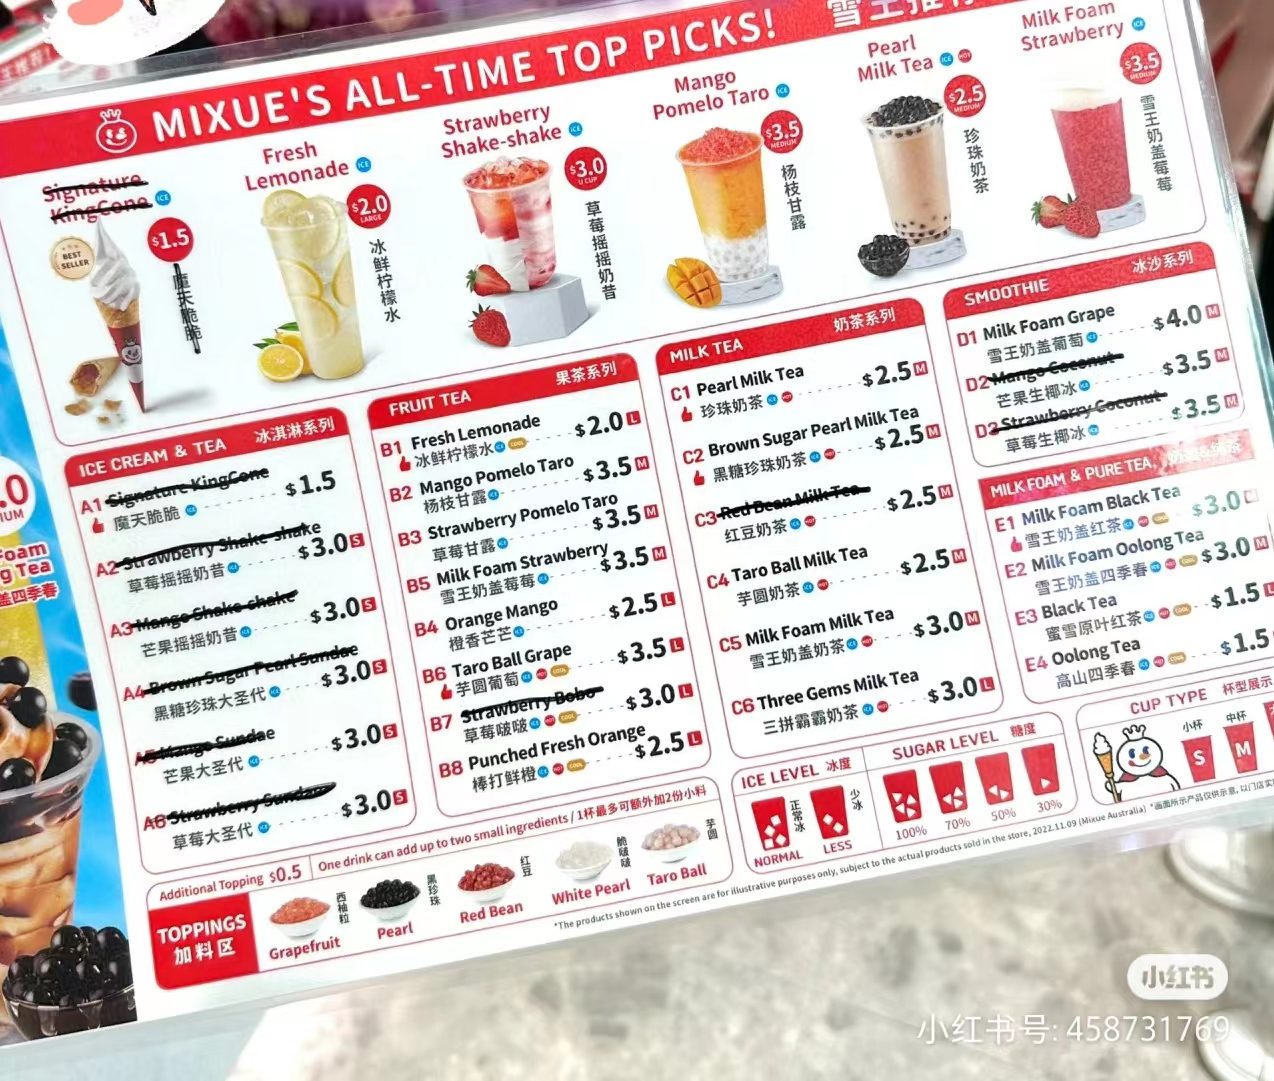 The menu of MIXUEBINGCHENG in Sydney contains black tea and oolong tea on it.